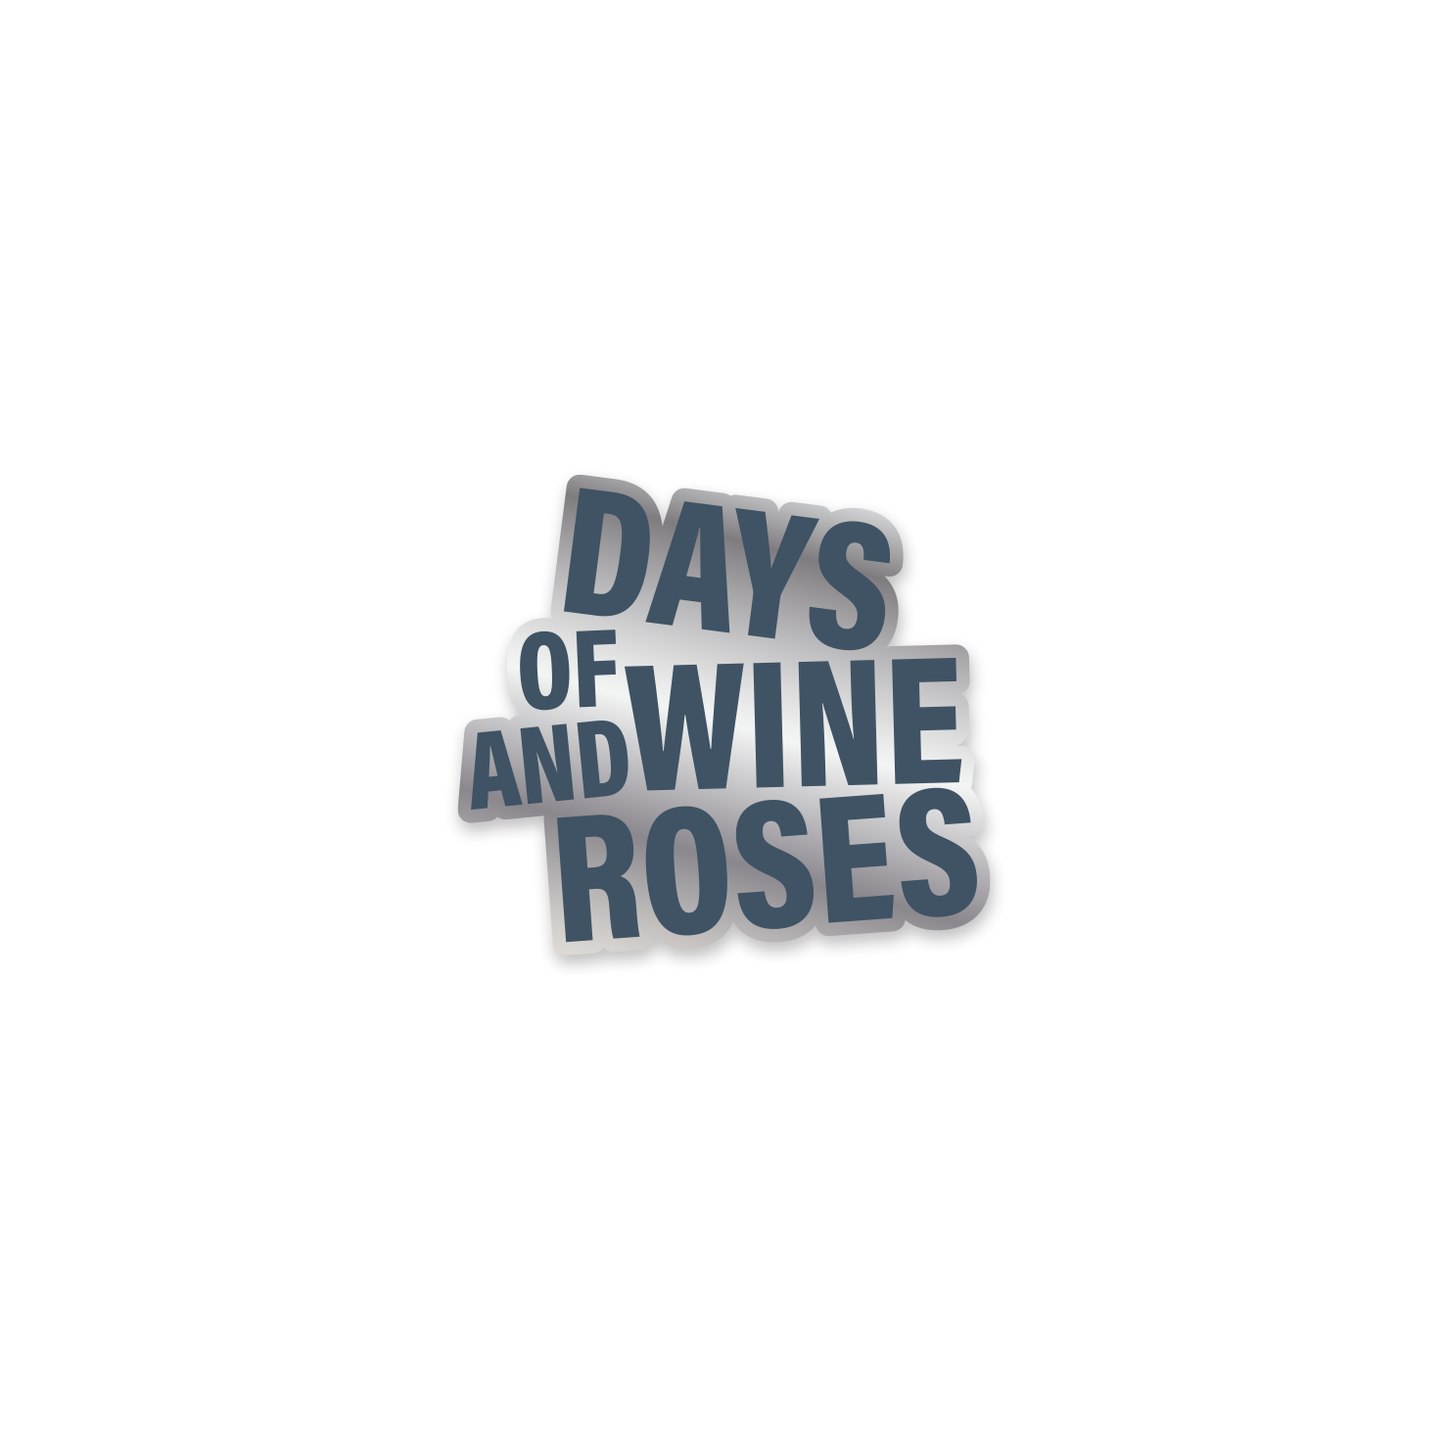 DAYS OF WINE AND ROSES Lapel Pin